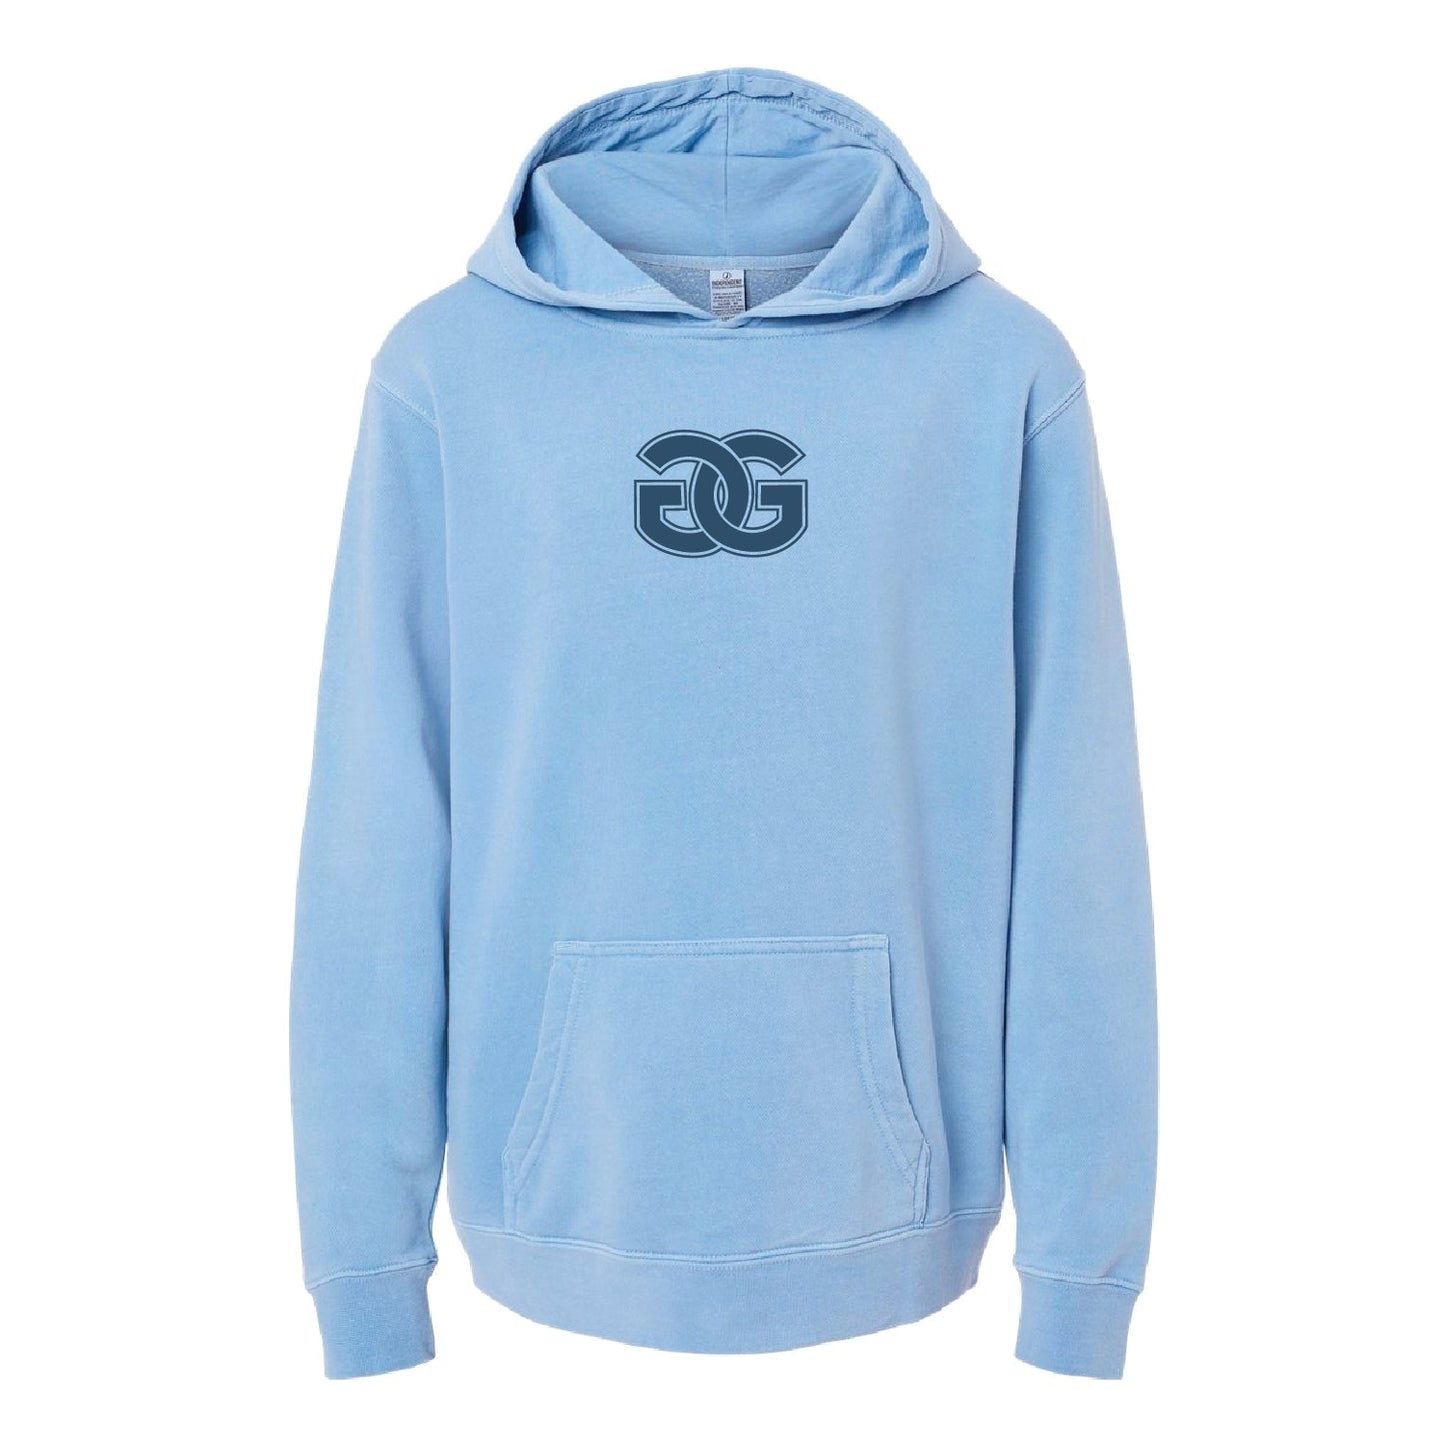 Golden Gate Youth Midweight Pigment-Dyed Hooded Sweatshirt - DSP On Demand